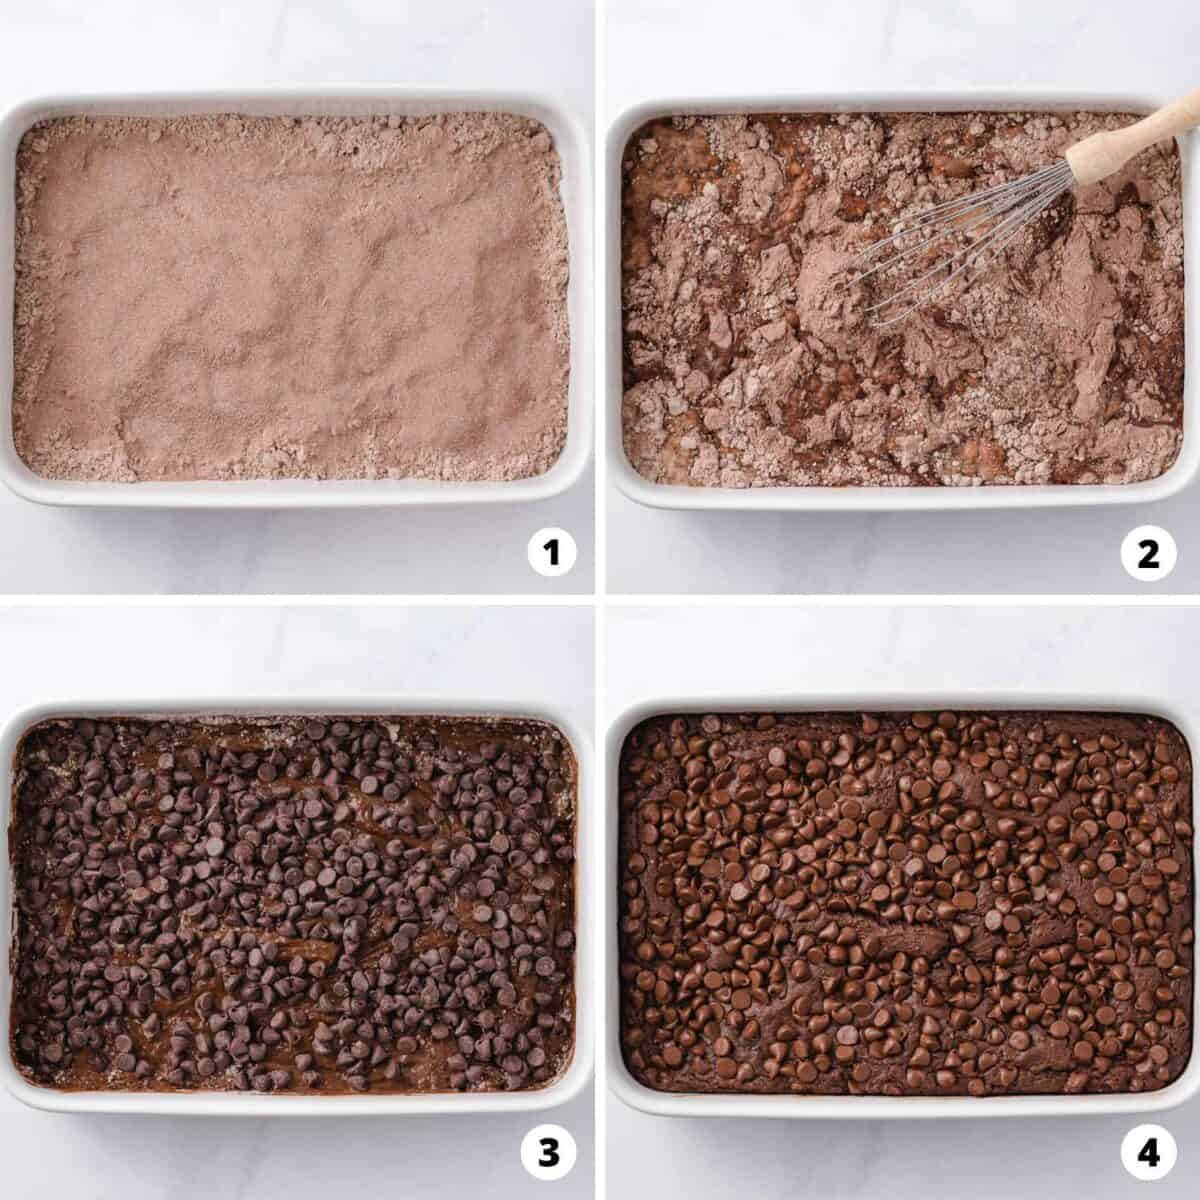 Showing how to make chocolate dump cake in a 4 step collage.